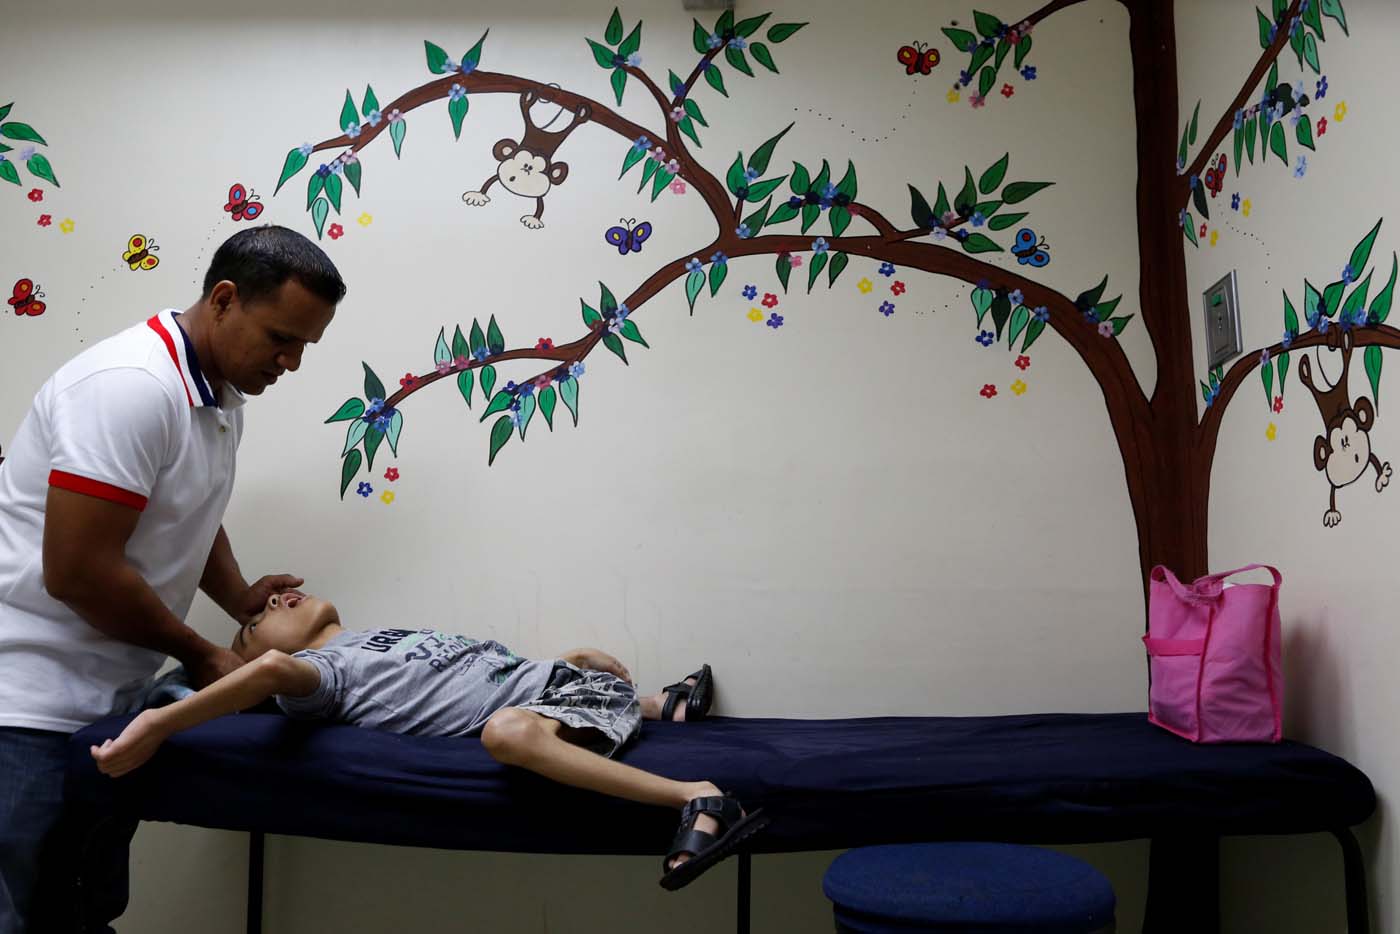 Miguel Anton (L) comforts his son Jose Gregorio Anton, 11, a neurological patient being treated with anticonvulsants, after a blood test at a clinic in La Guaira, Venezuela February 20, 2017. REUTERS/Carlos Garcia Rawlins    SEARCH "EPILEPSY CARACAS" FOR THIS STORY. SEARCH "WIDER IMAGE" FOR ALL STORIES.